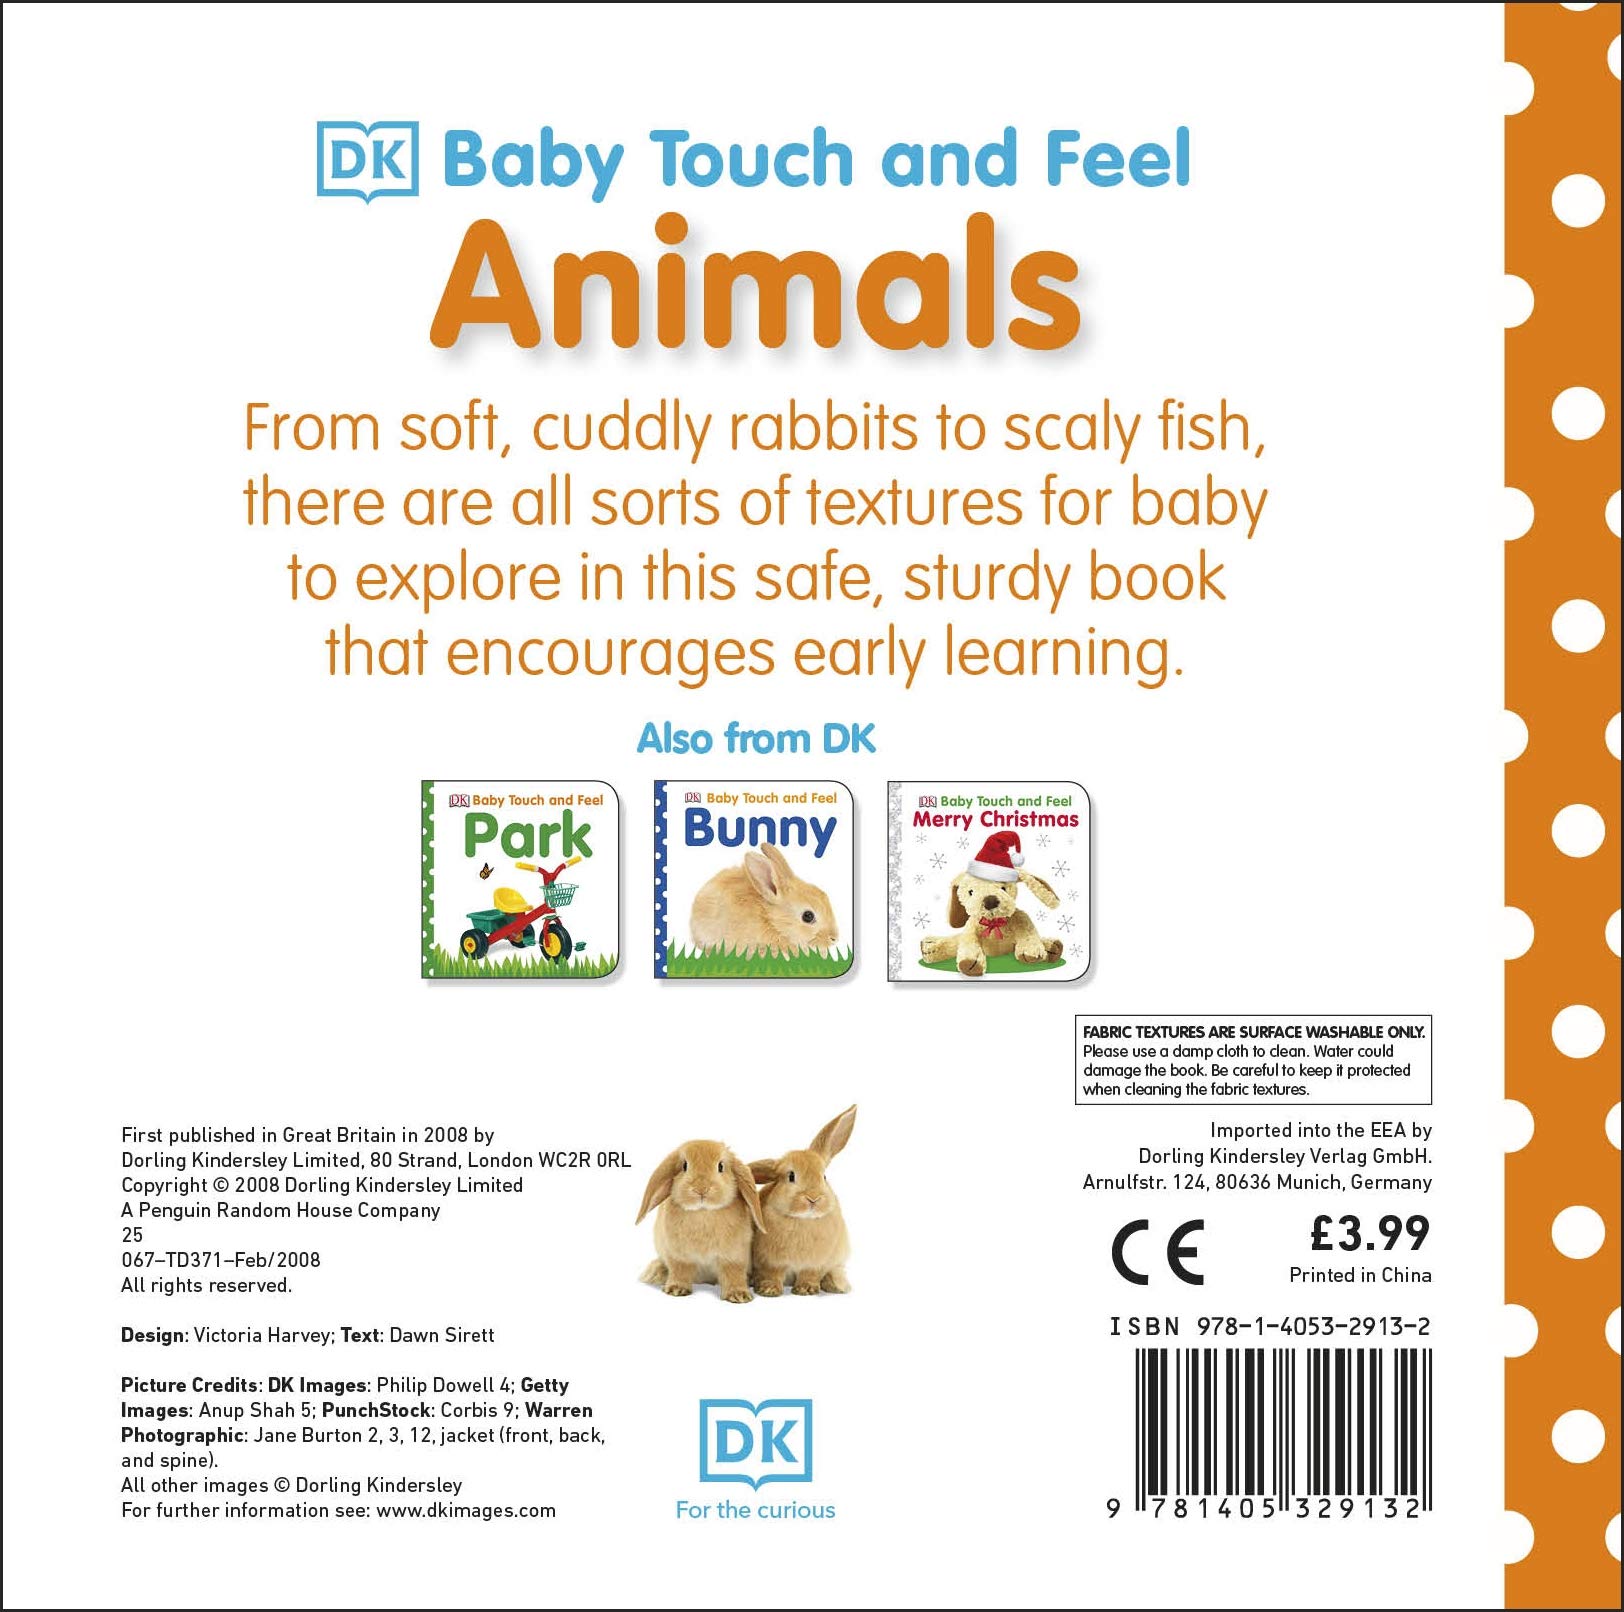 Baby Touch And Feel Animals by DK